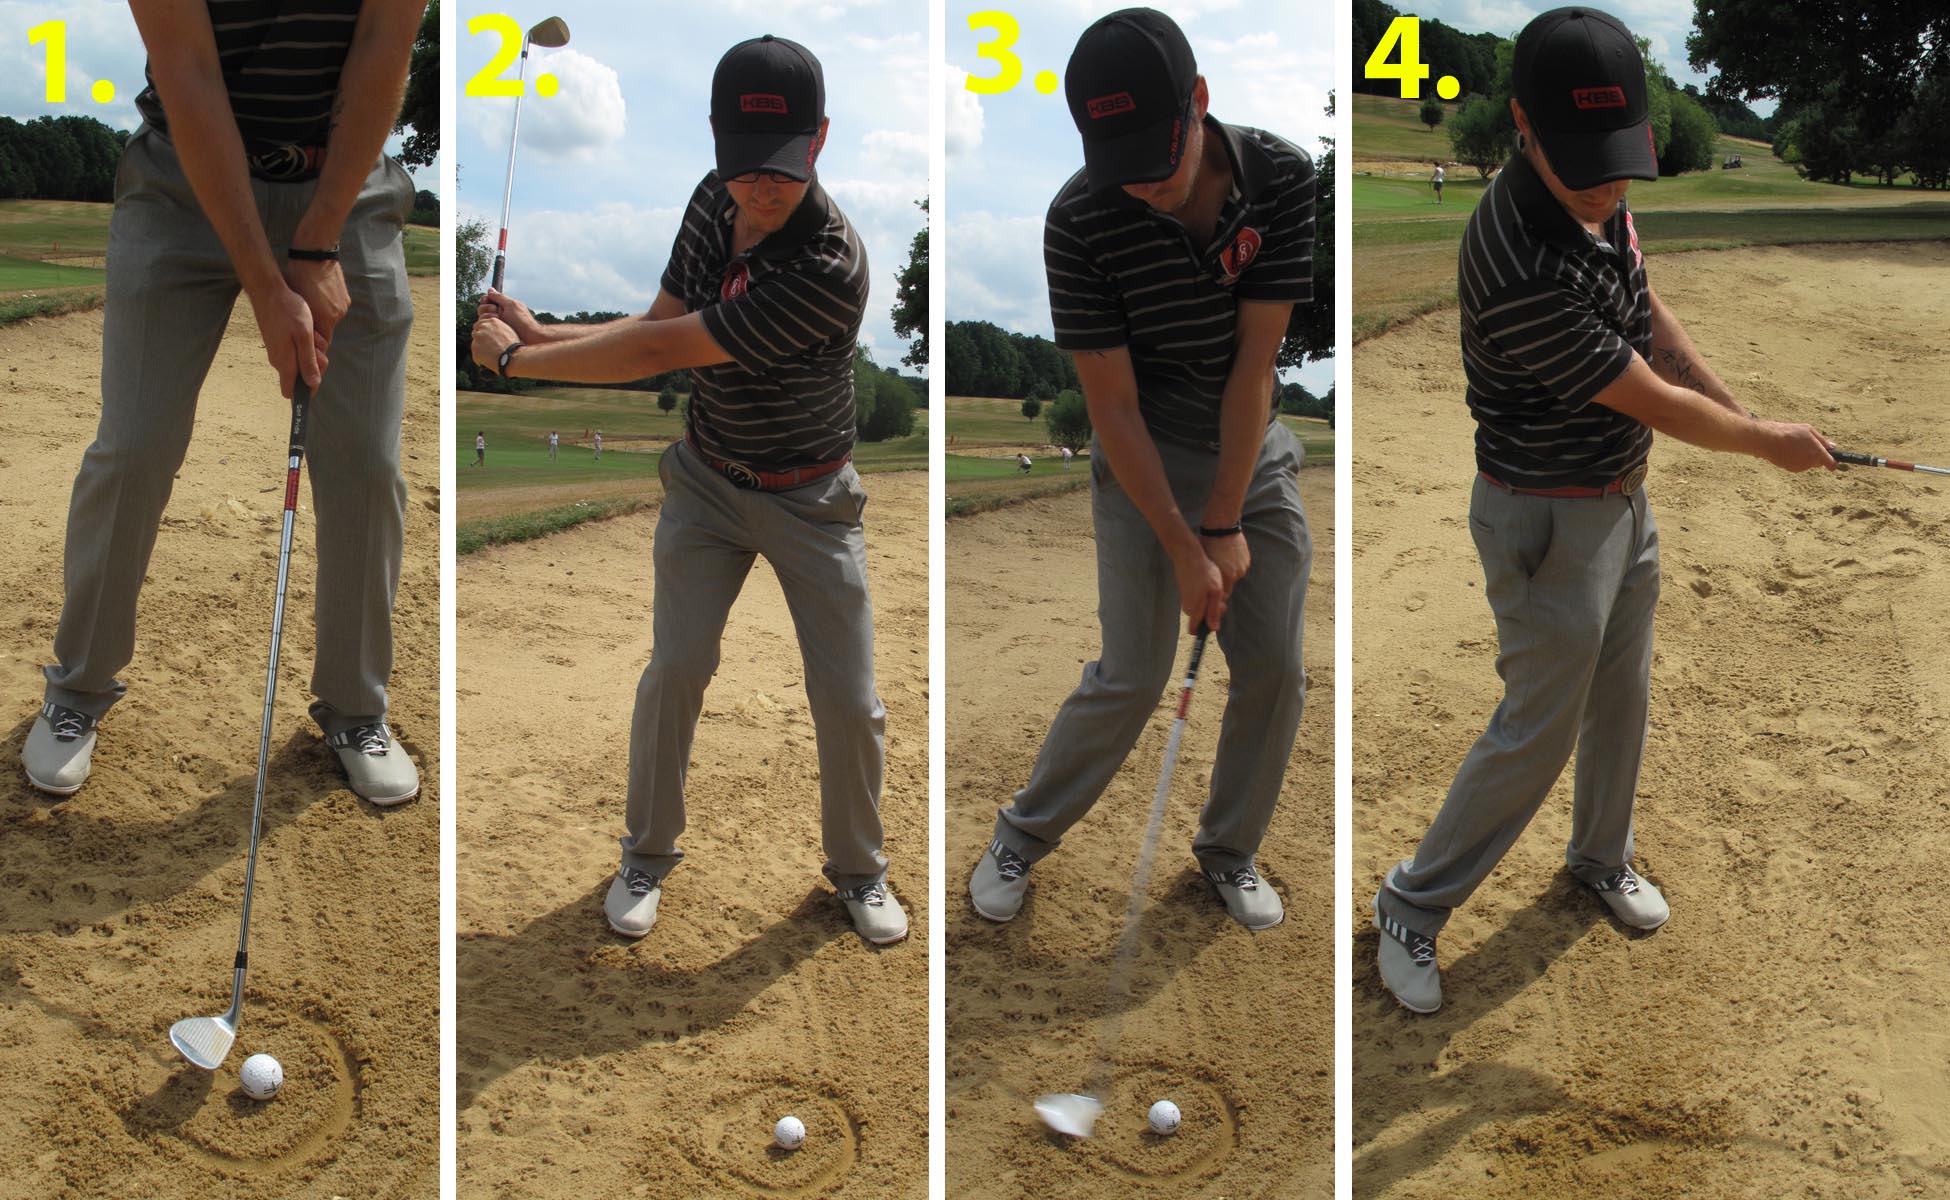 Drawing a circle in the bunker is a simple drill for practice that will help you make contact with the sand before the ball